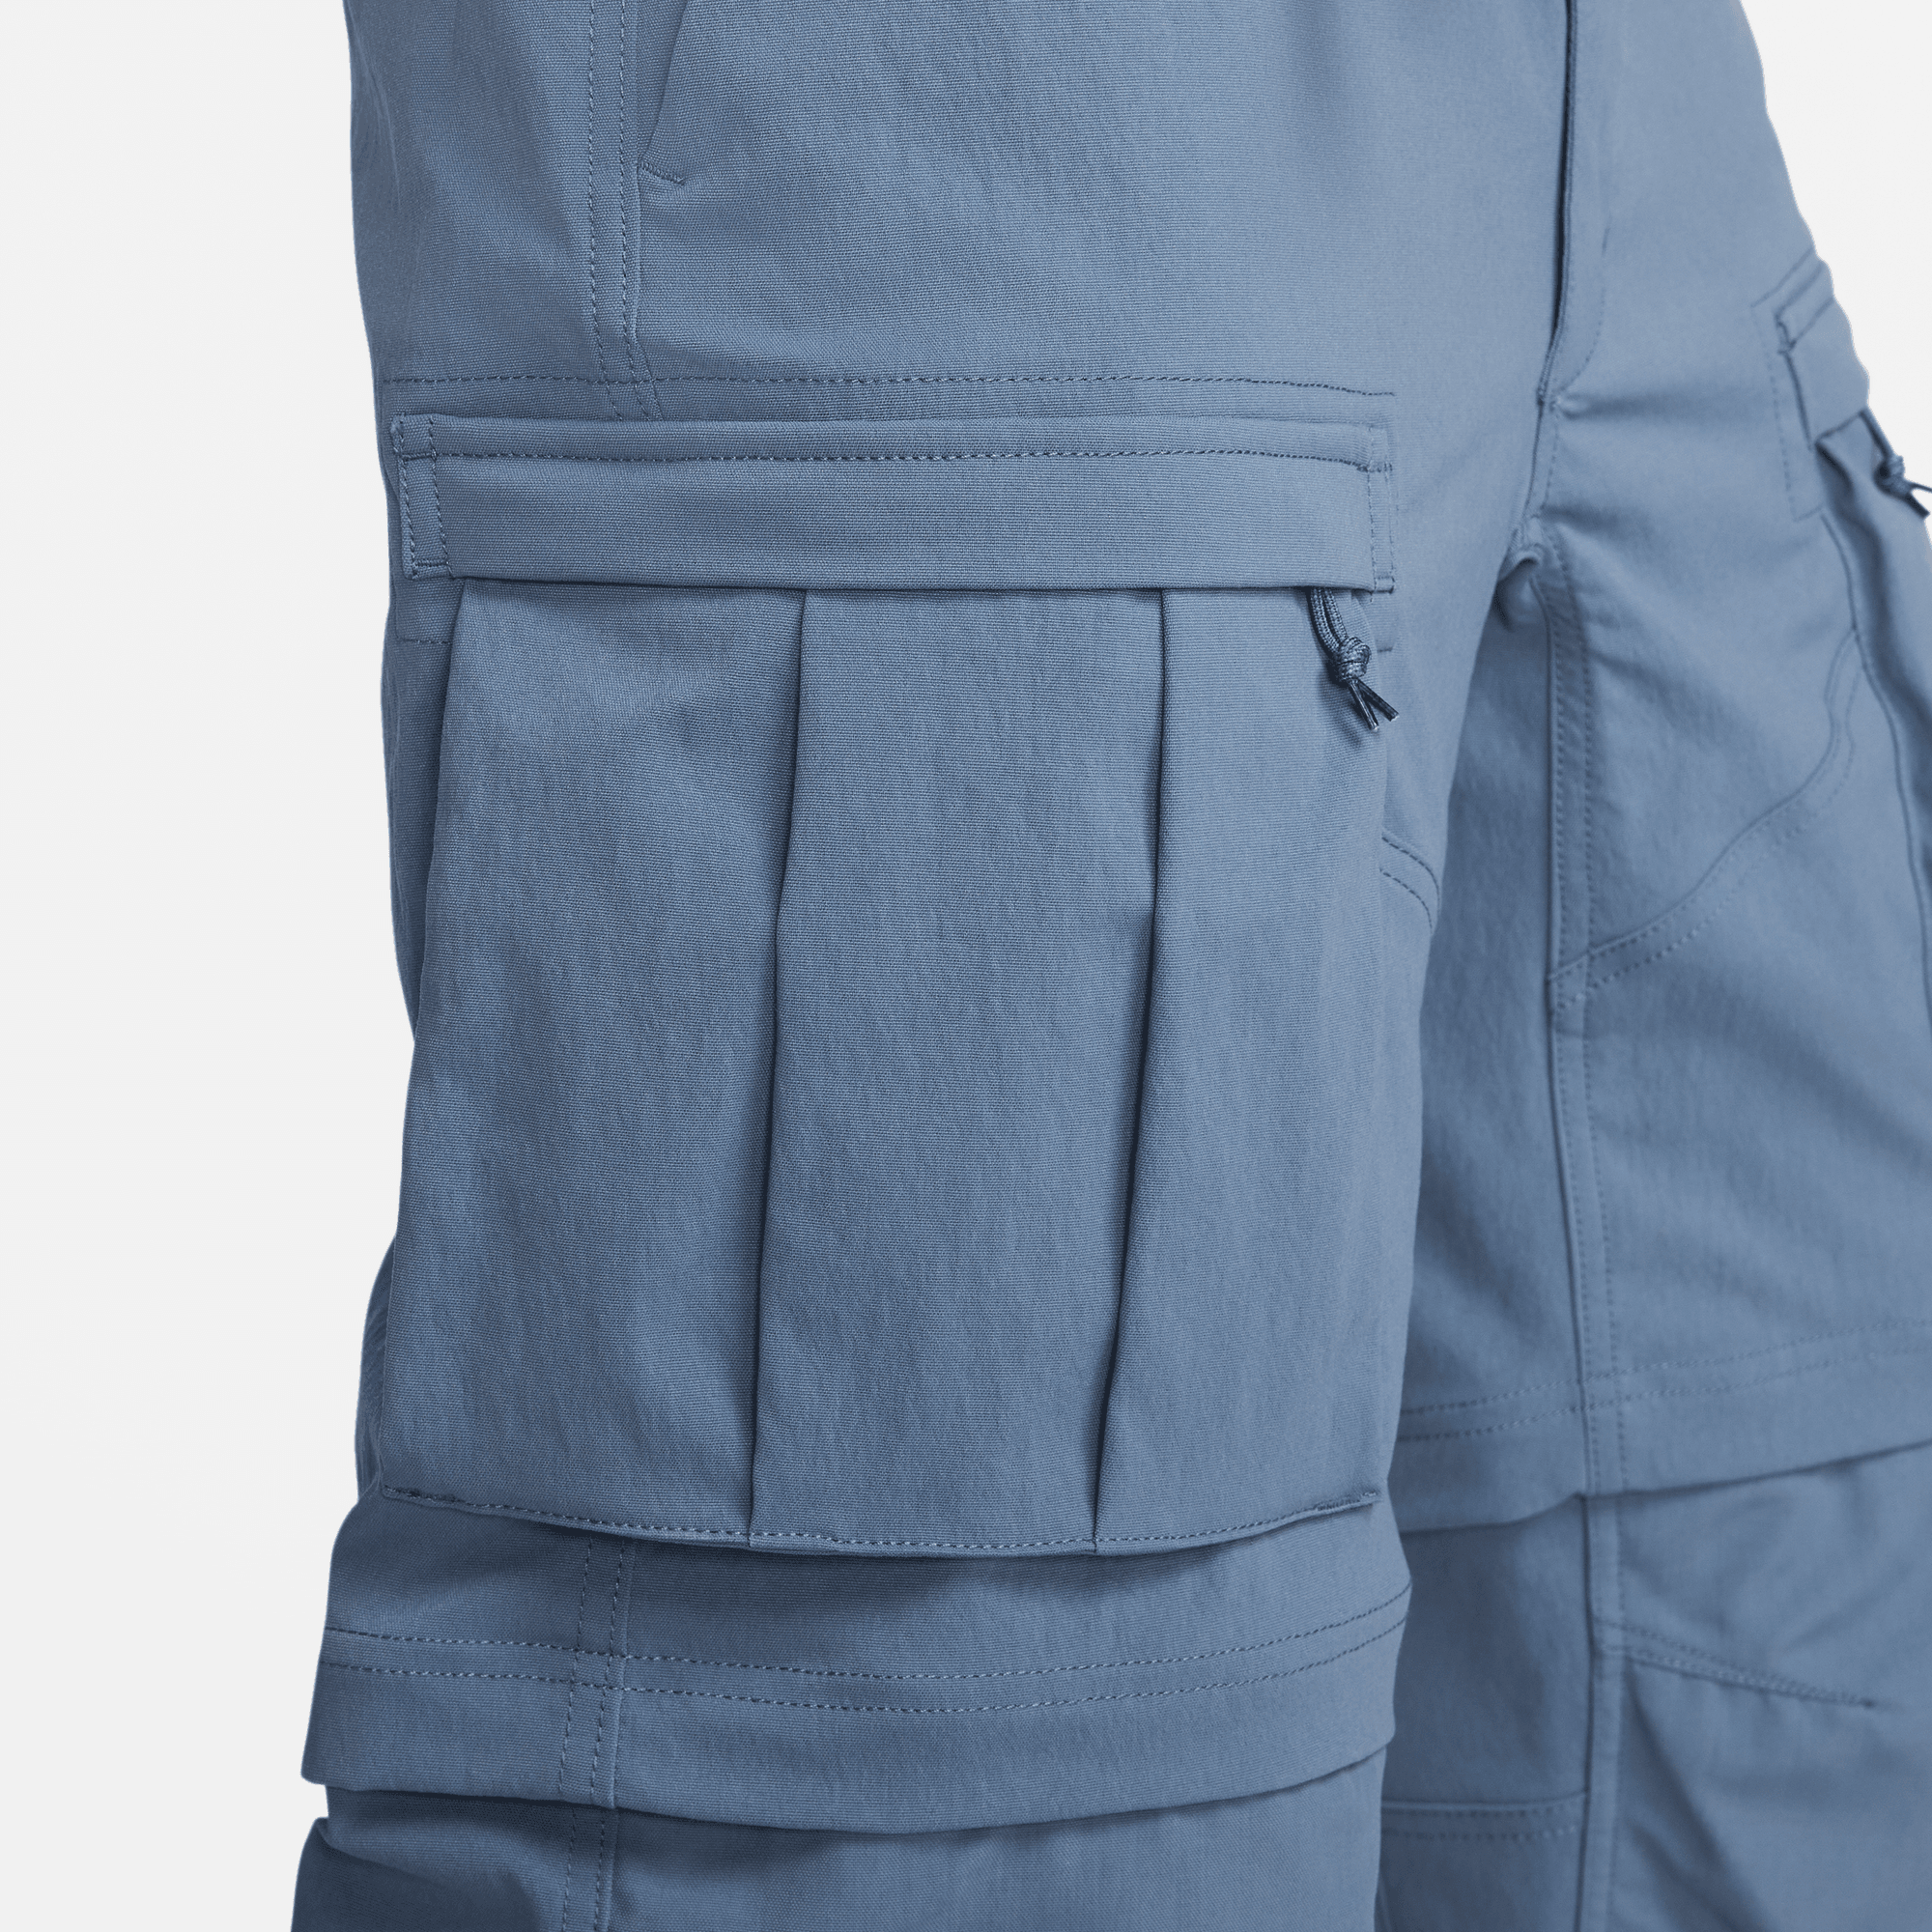 ACG SMITH SUMMIT CARGO PANTS - DIFFUSED BLUE